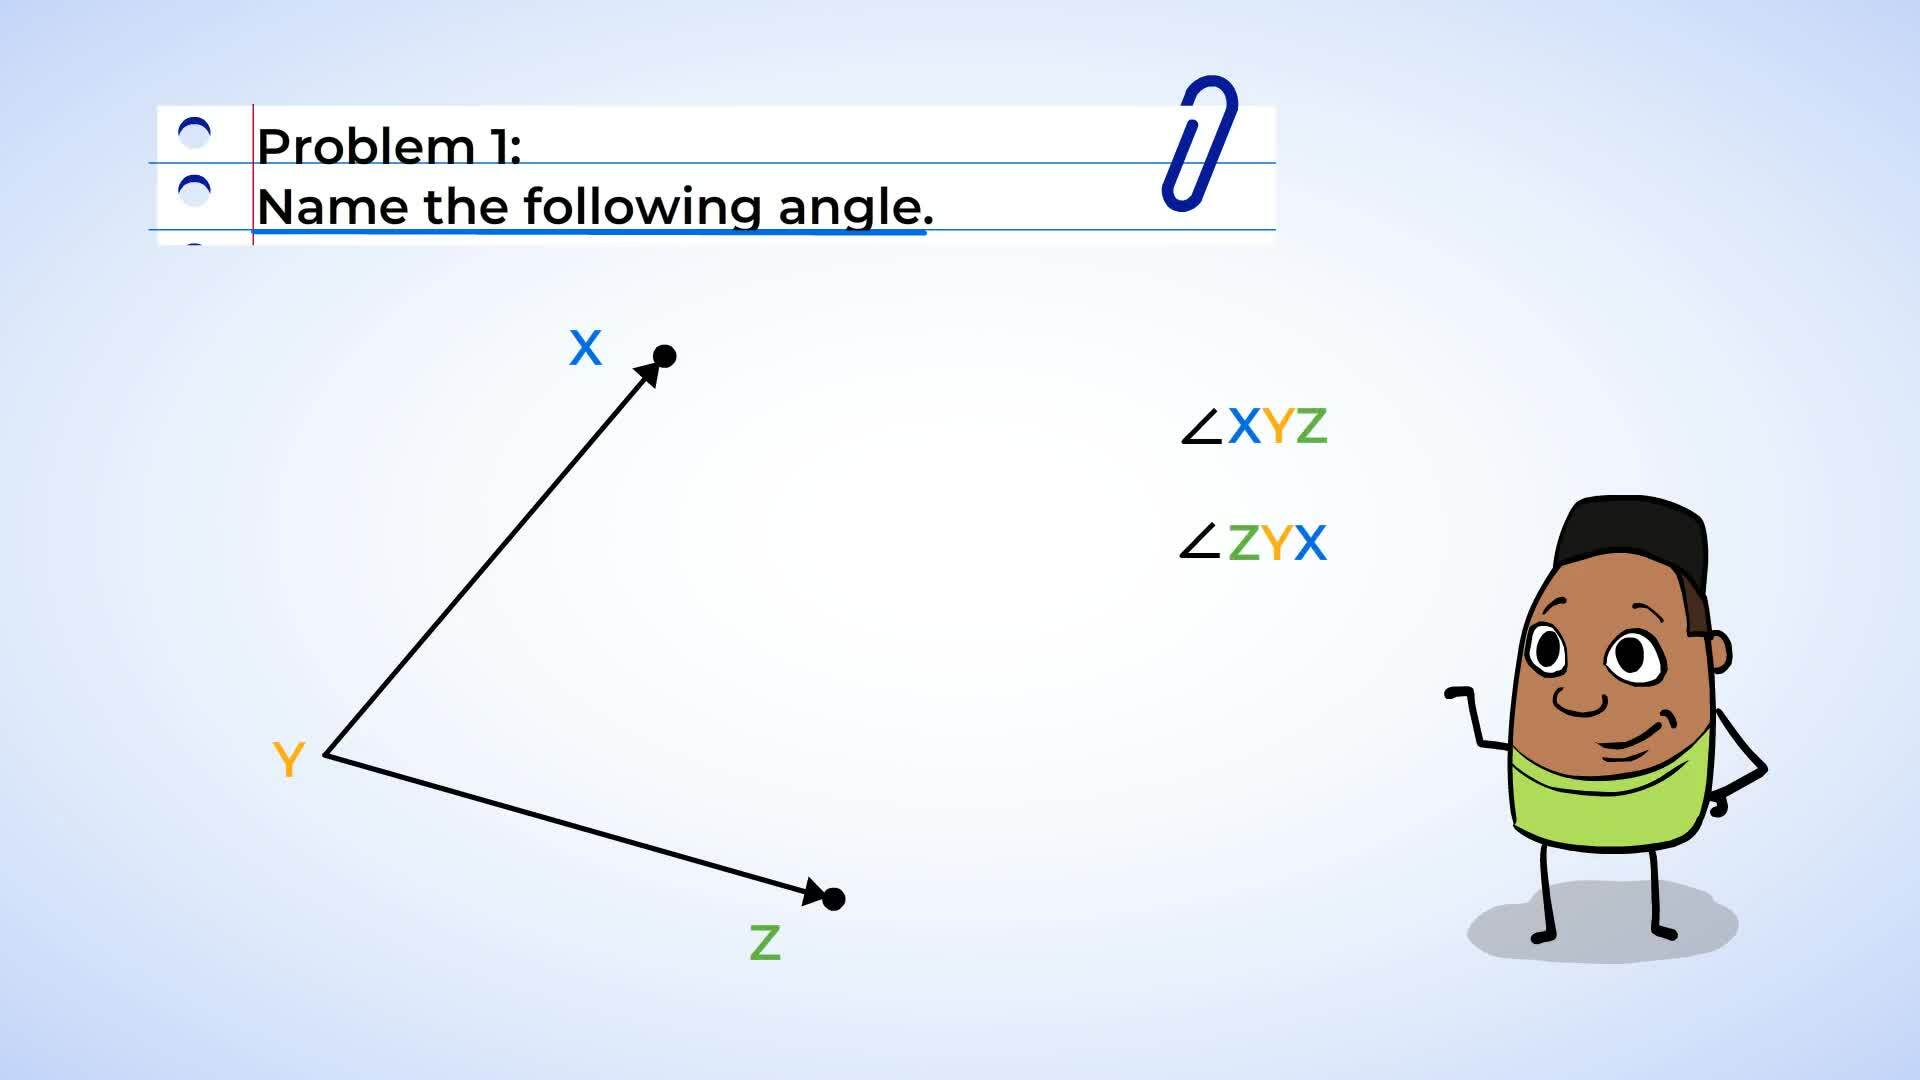 Introduction to Angles